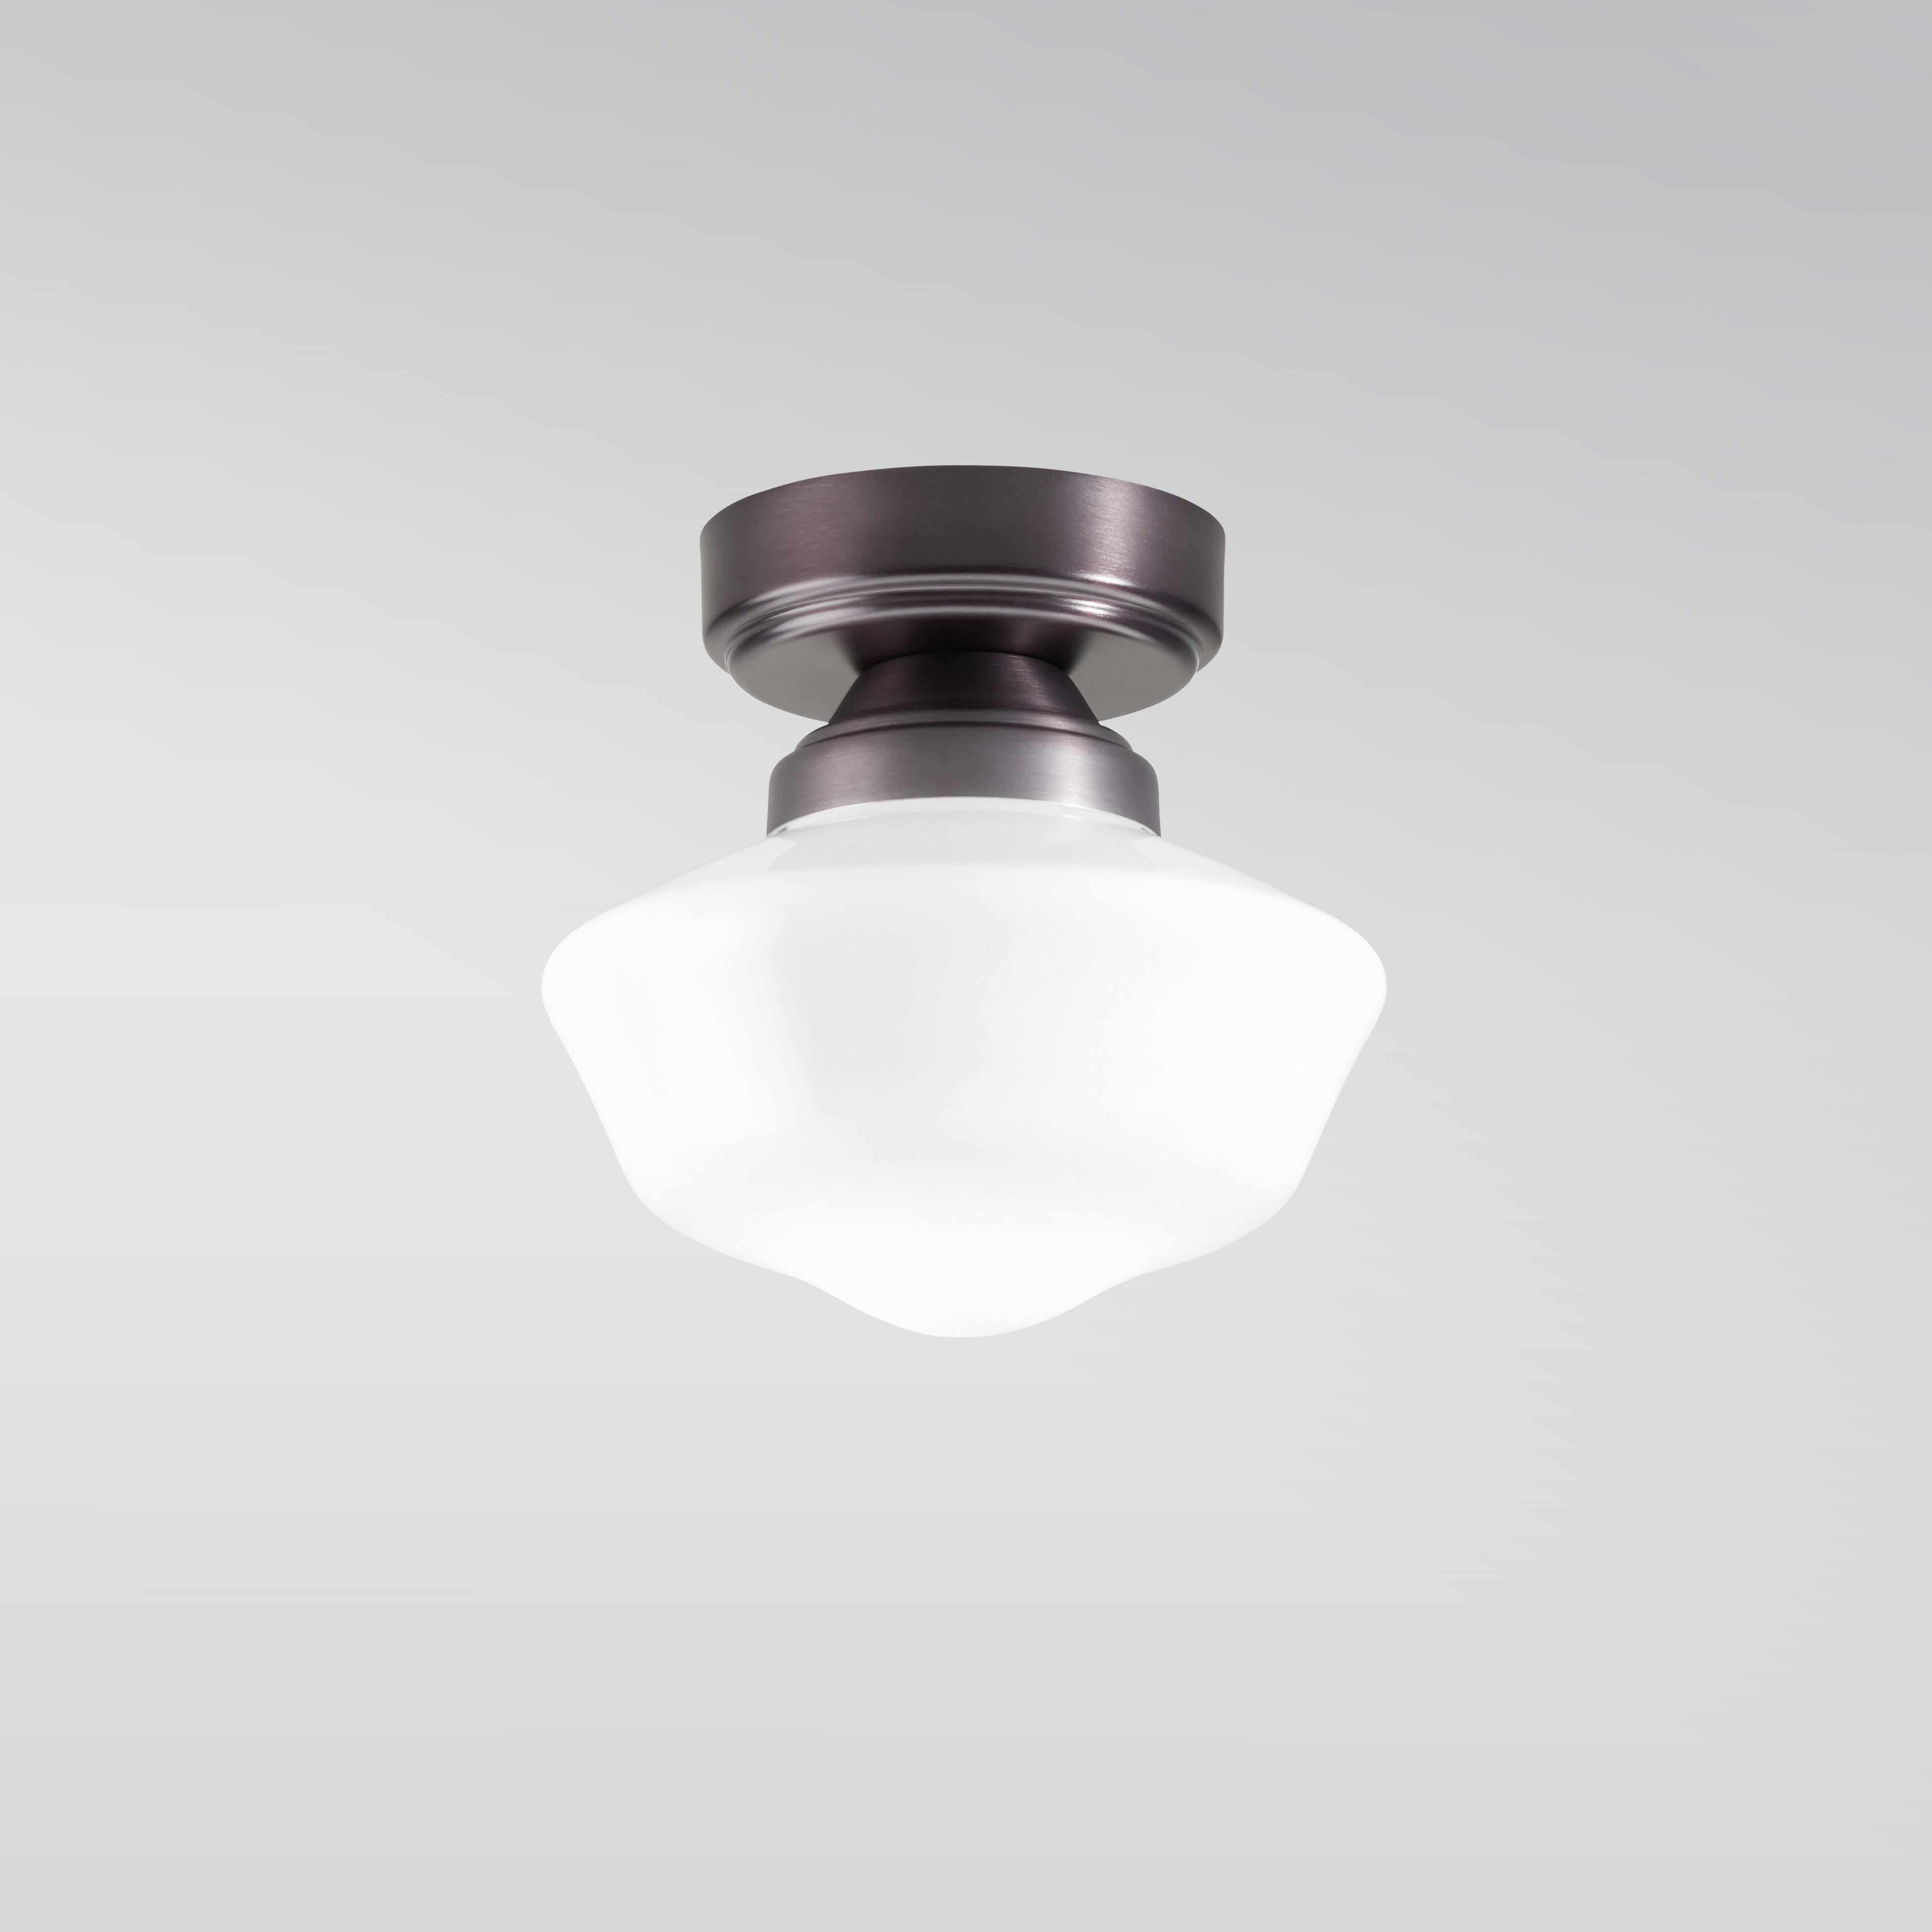 A classic school house style ceiling luminaire